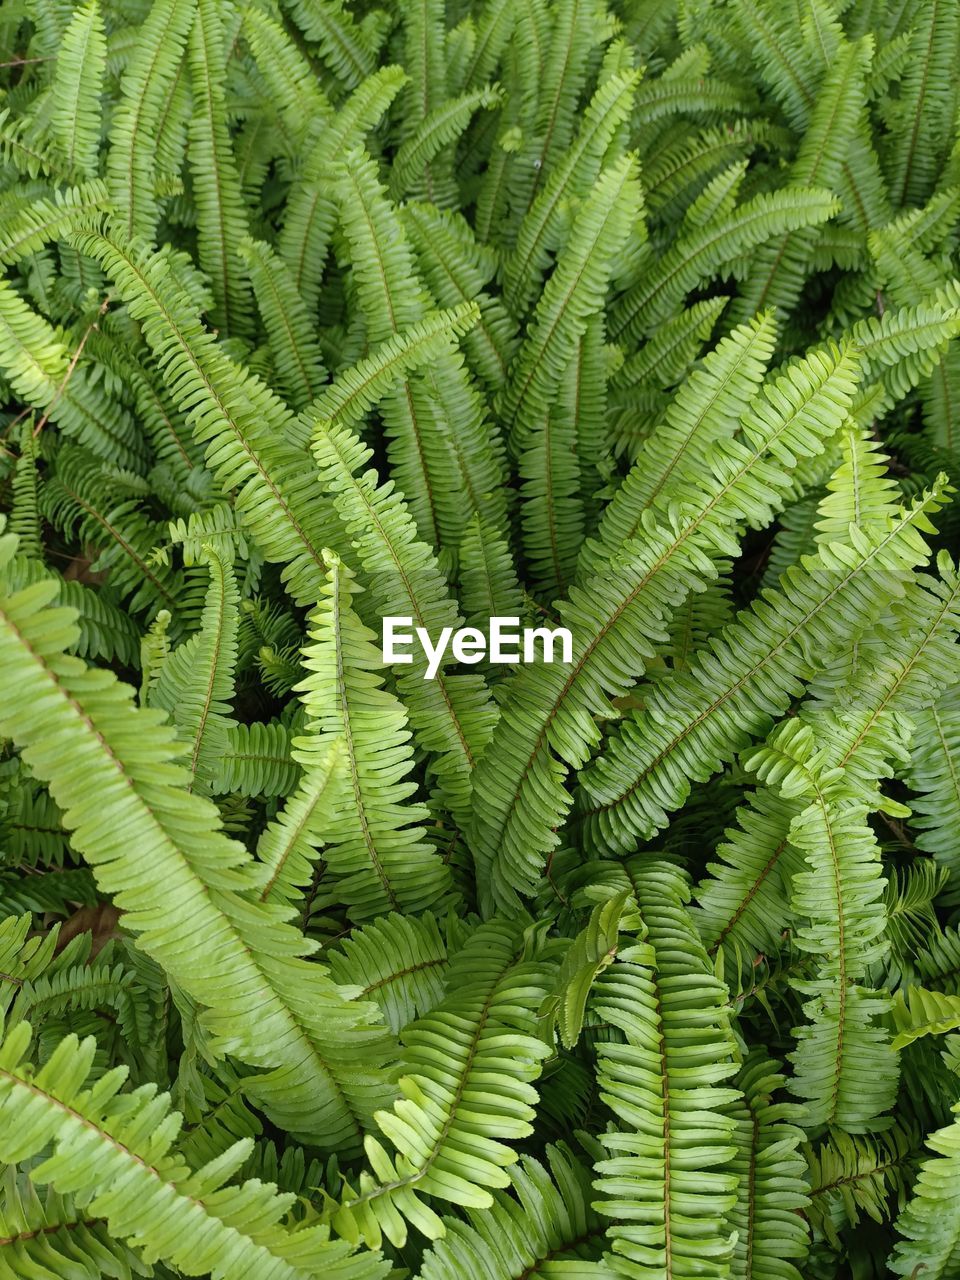 green, ferns and horsetails, plant, leaf, growth, fern, plant part, beauty in nature, full frame, nature, no people, backgrounds, close-up, day, plant stem, tree, vegetation, outdoors, foliage, lush foliage, tranquility, freshness, botany